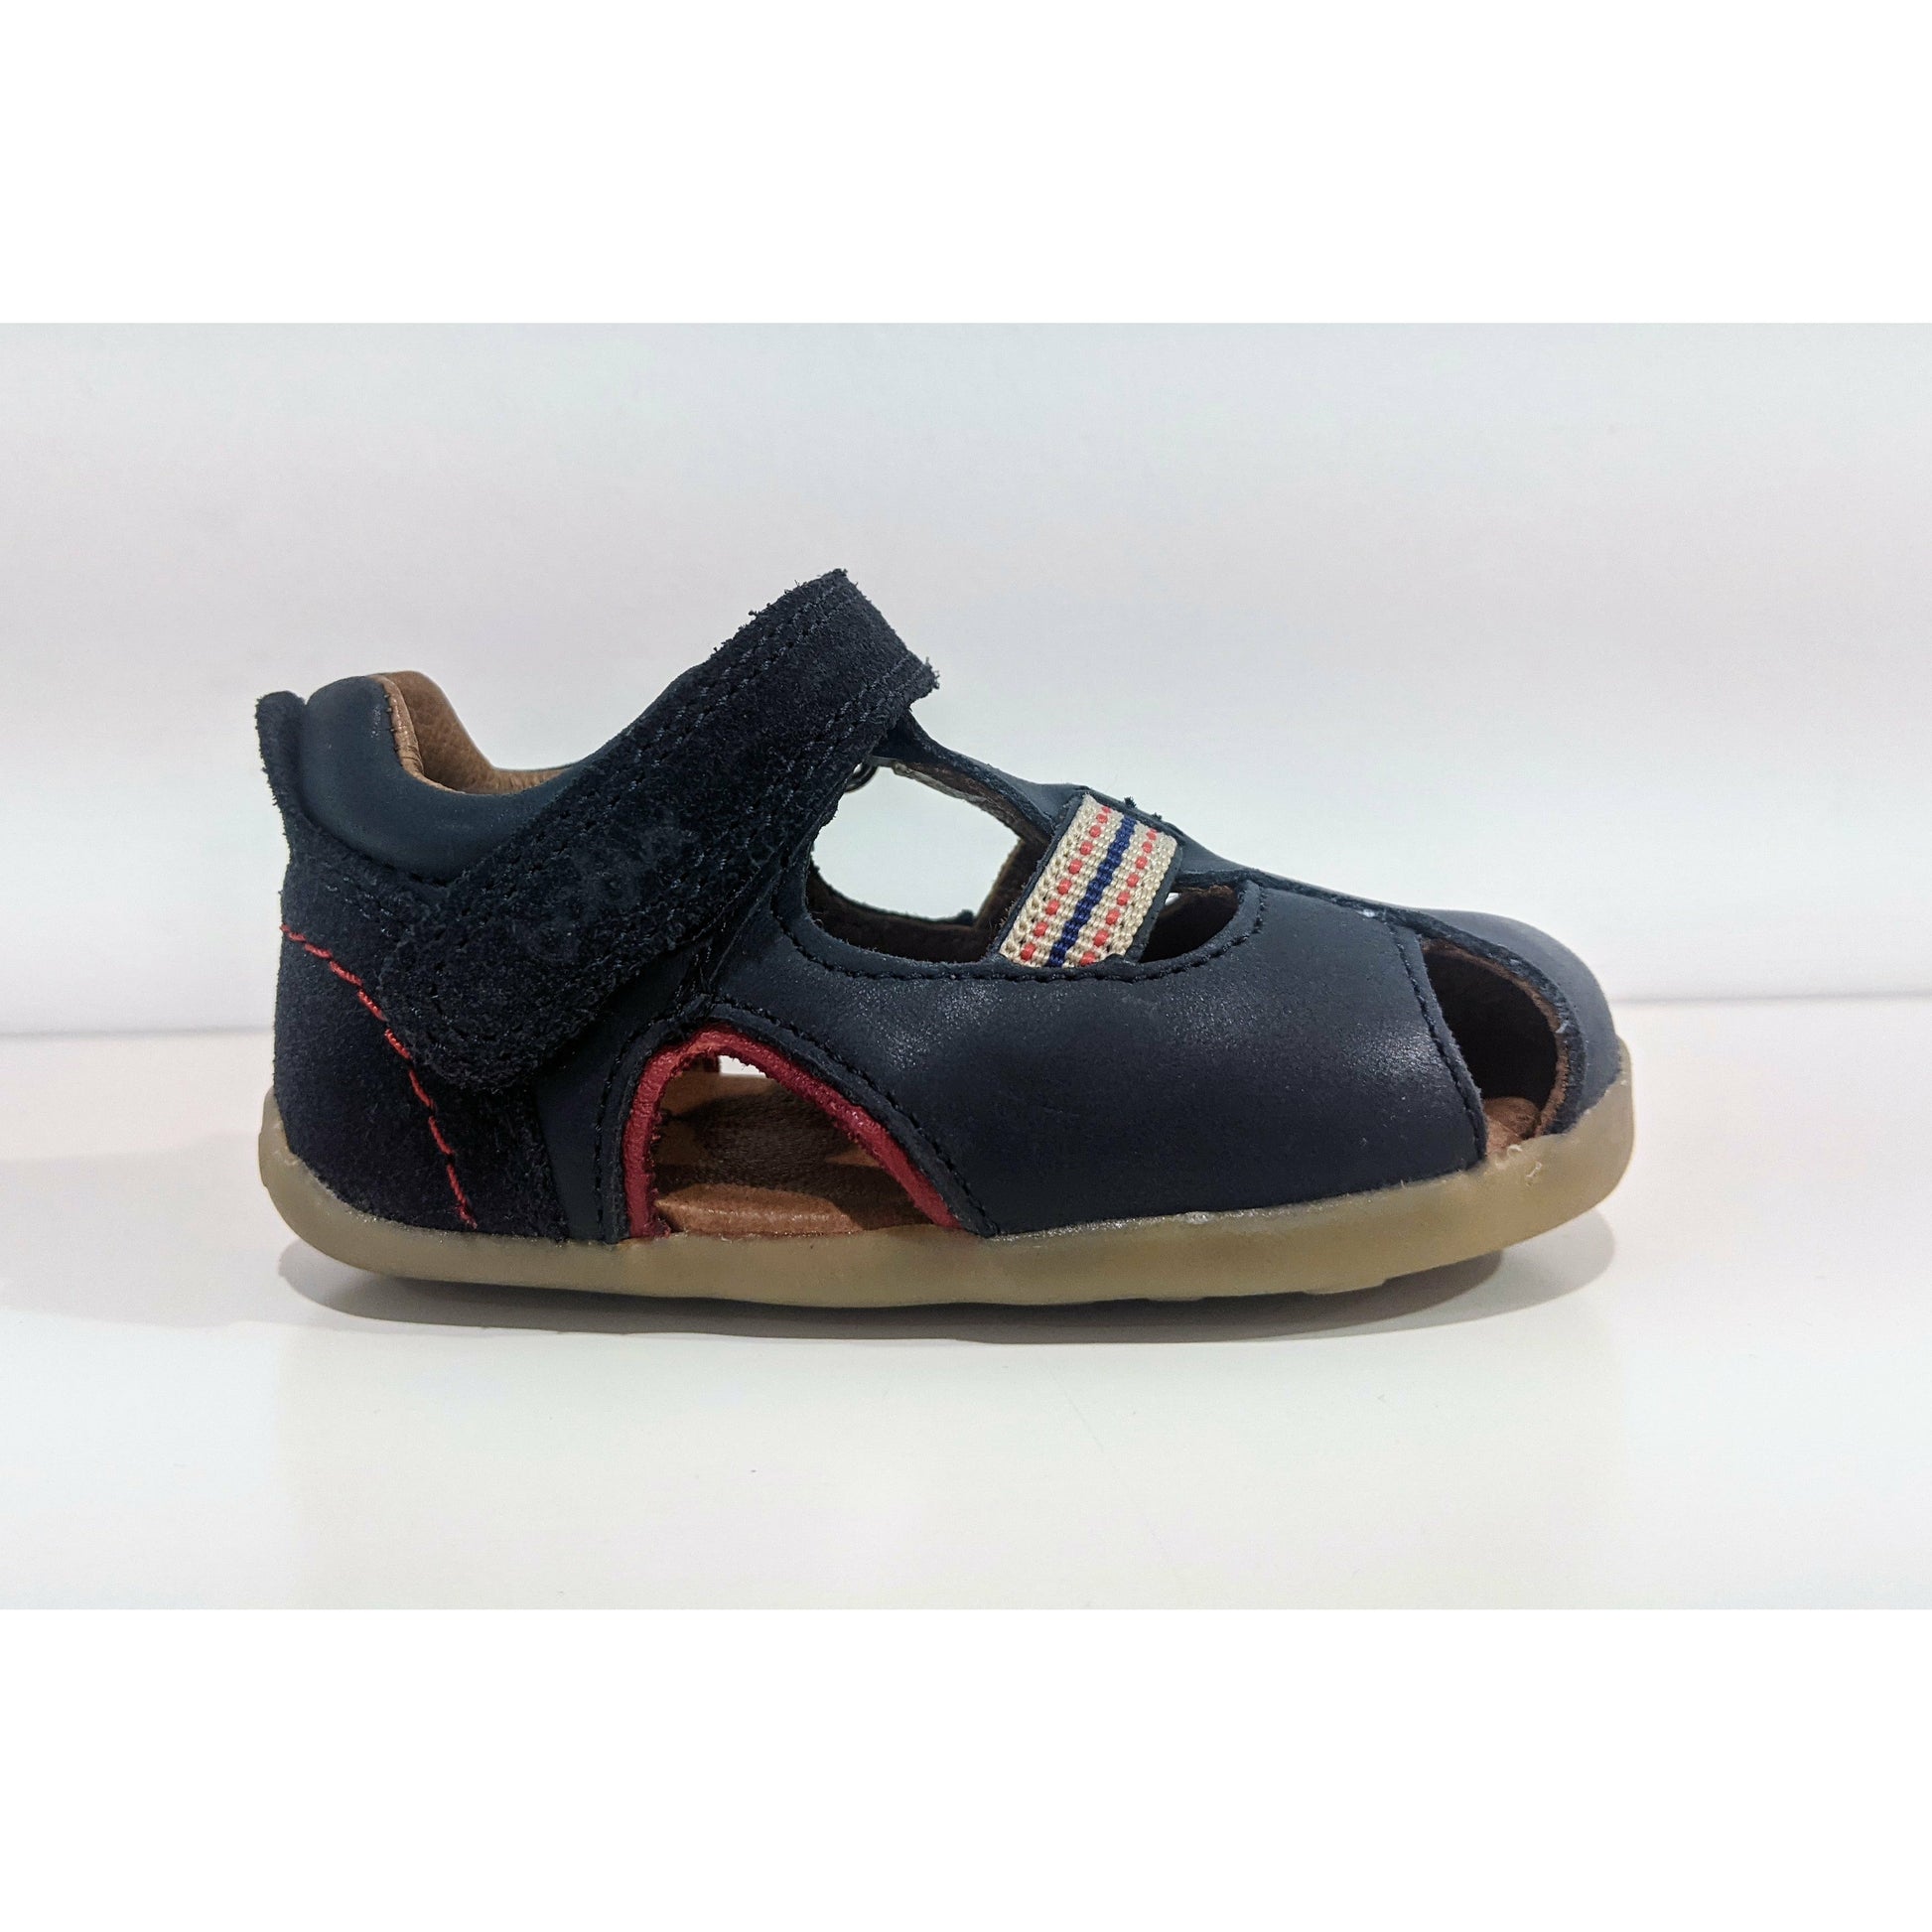 A boys closed toe sandal by Bobux,in Navywith velcro fastening. Right side view.